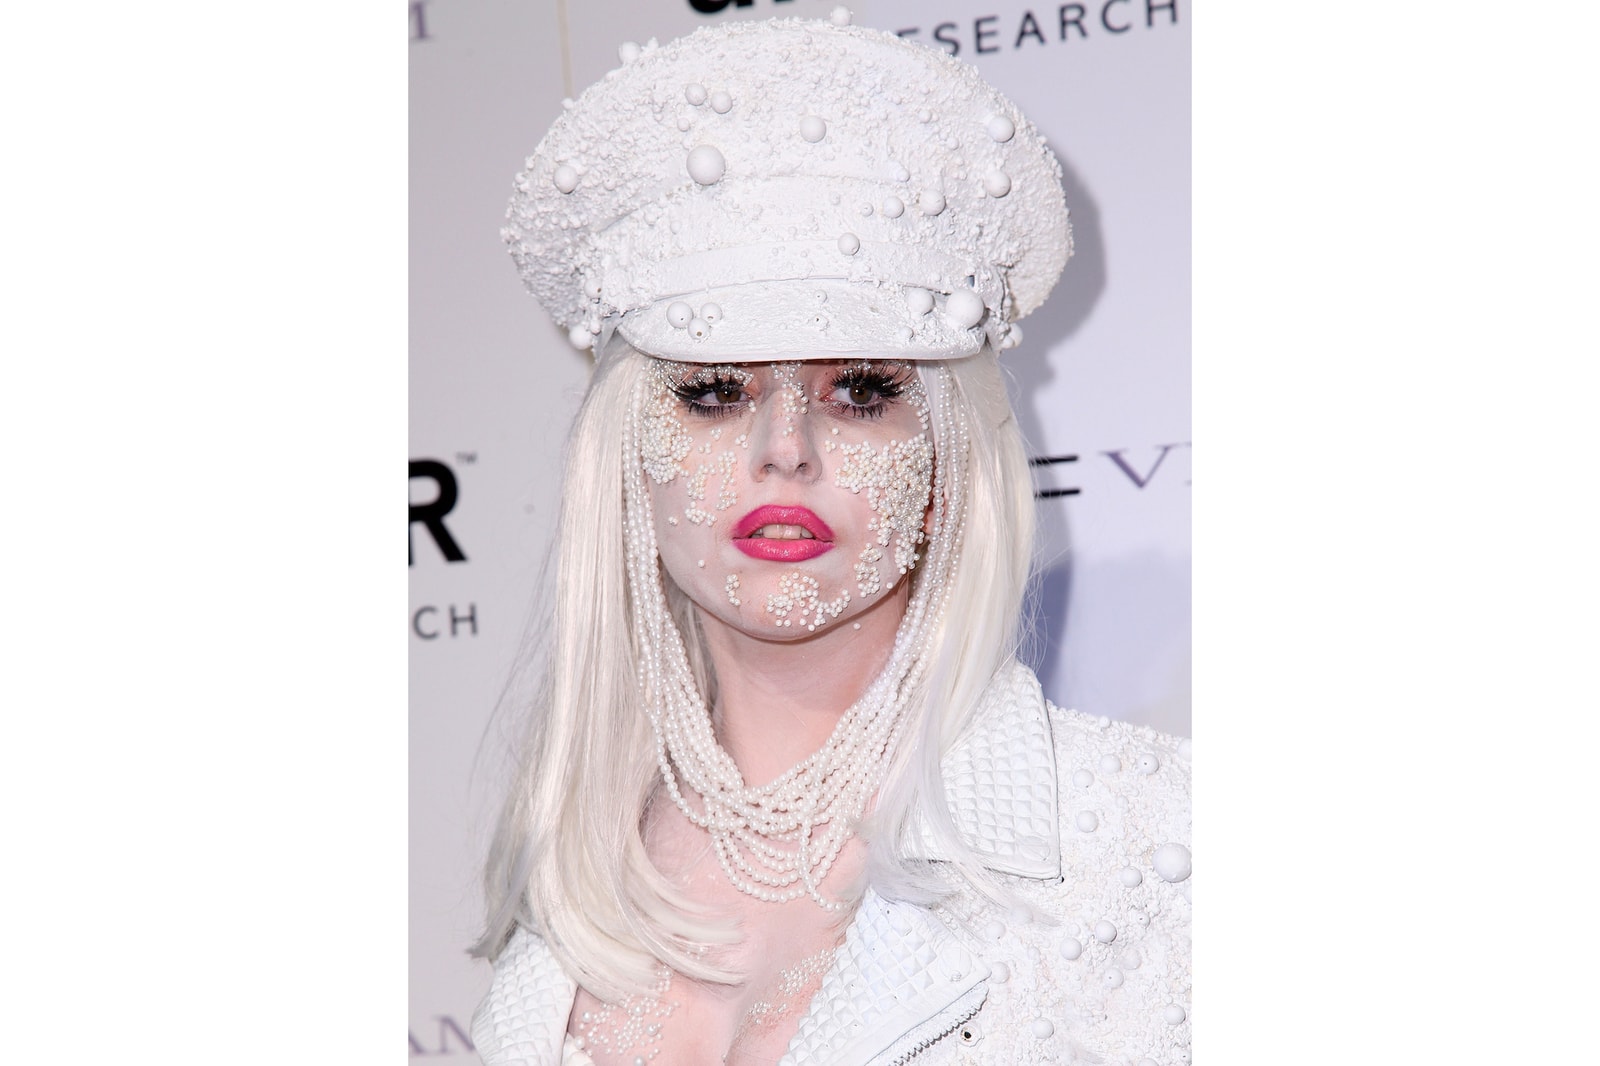 Lady Gaga's Best Fashion Looks and Outfits Grammys Oscars Meat Dress Space Egg Hair Bow